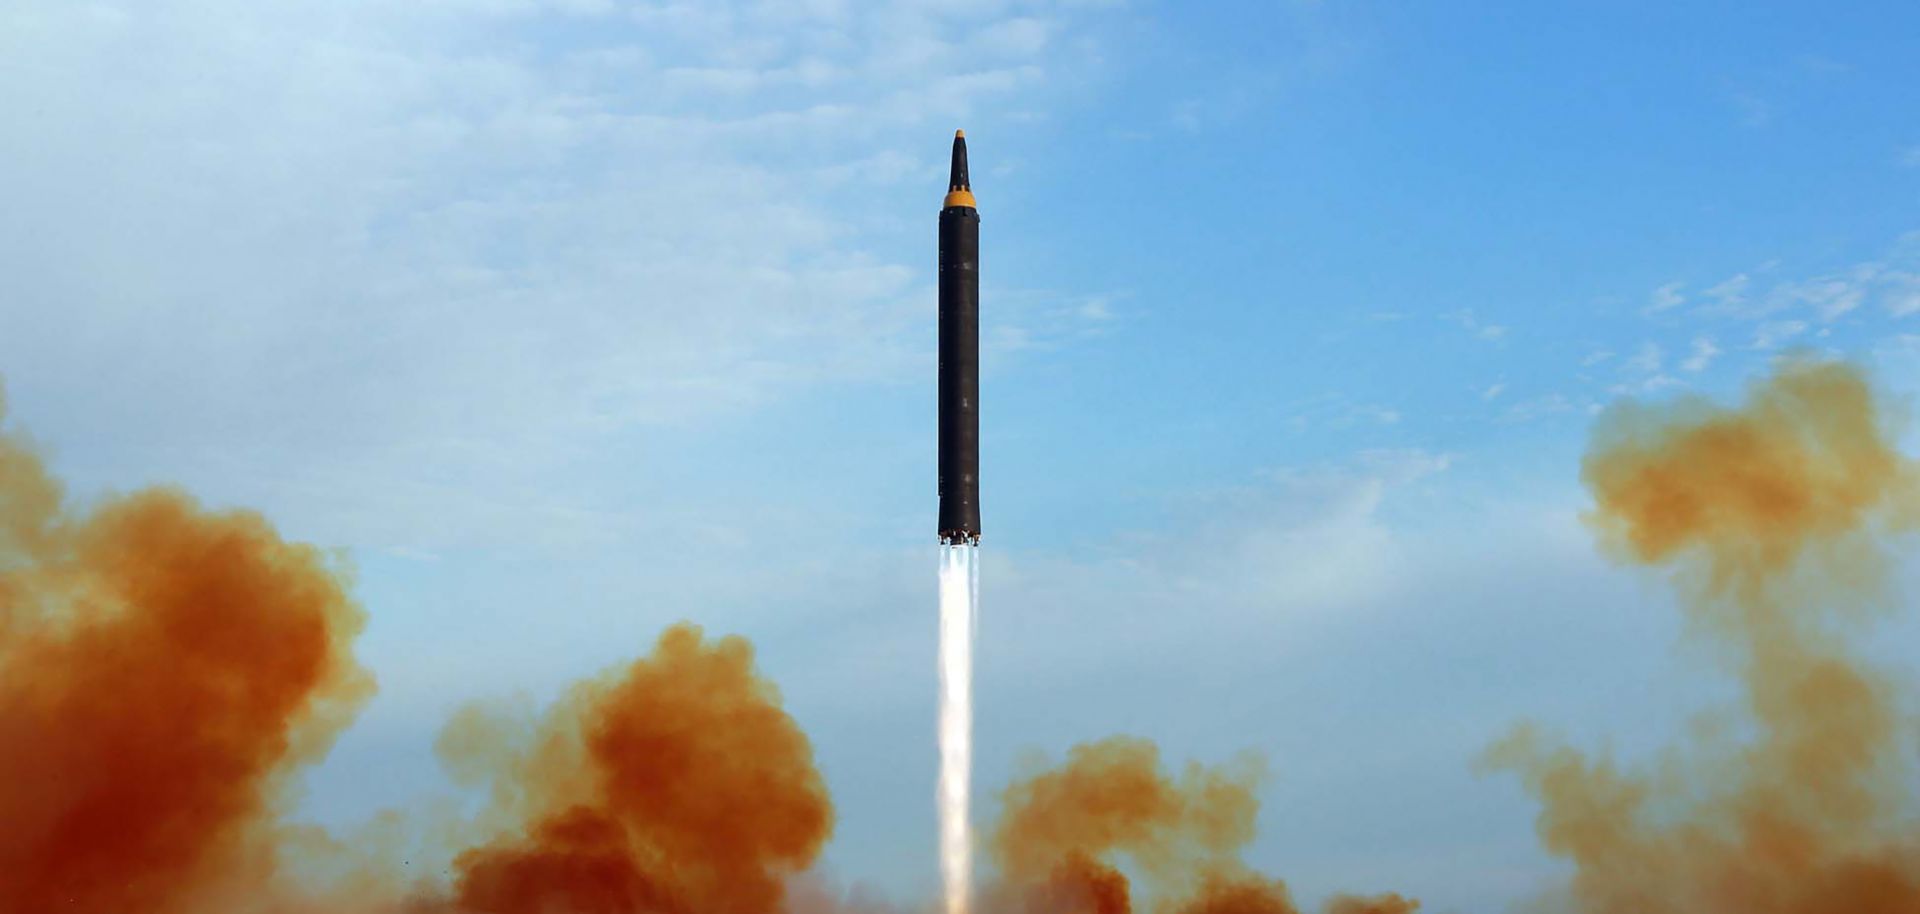 A launching drill of the medium-and-long range strategic ballistic rocket Hwasong-12 at an undisclosed location. 